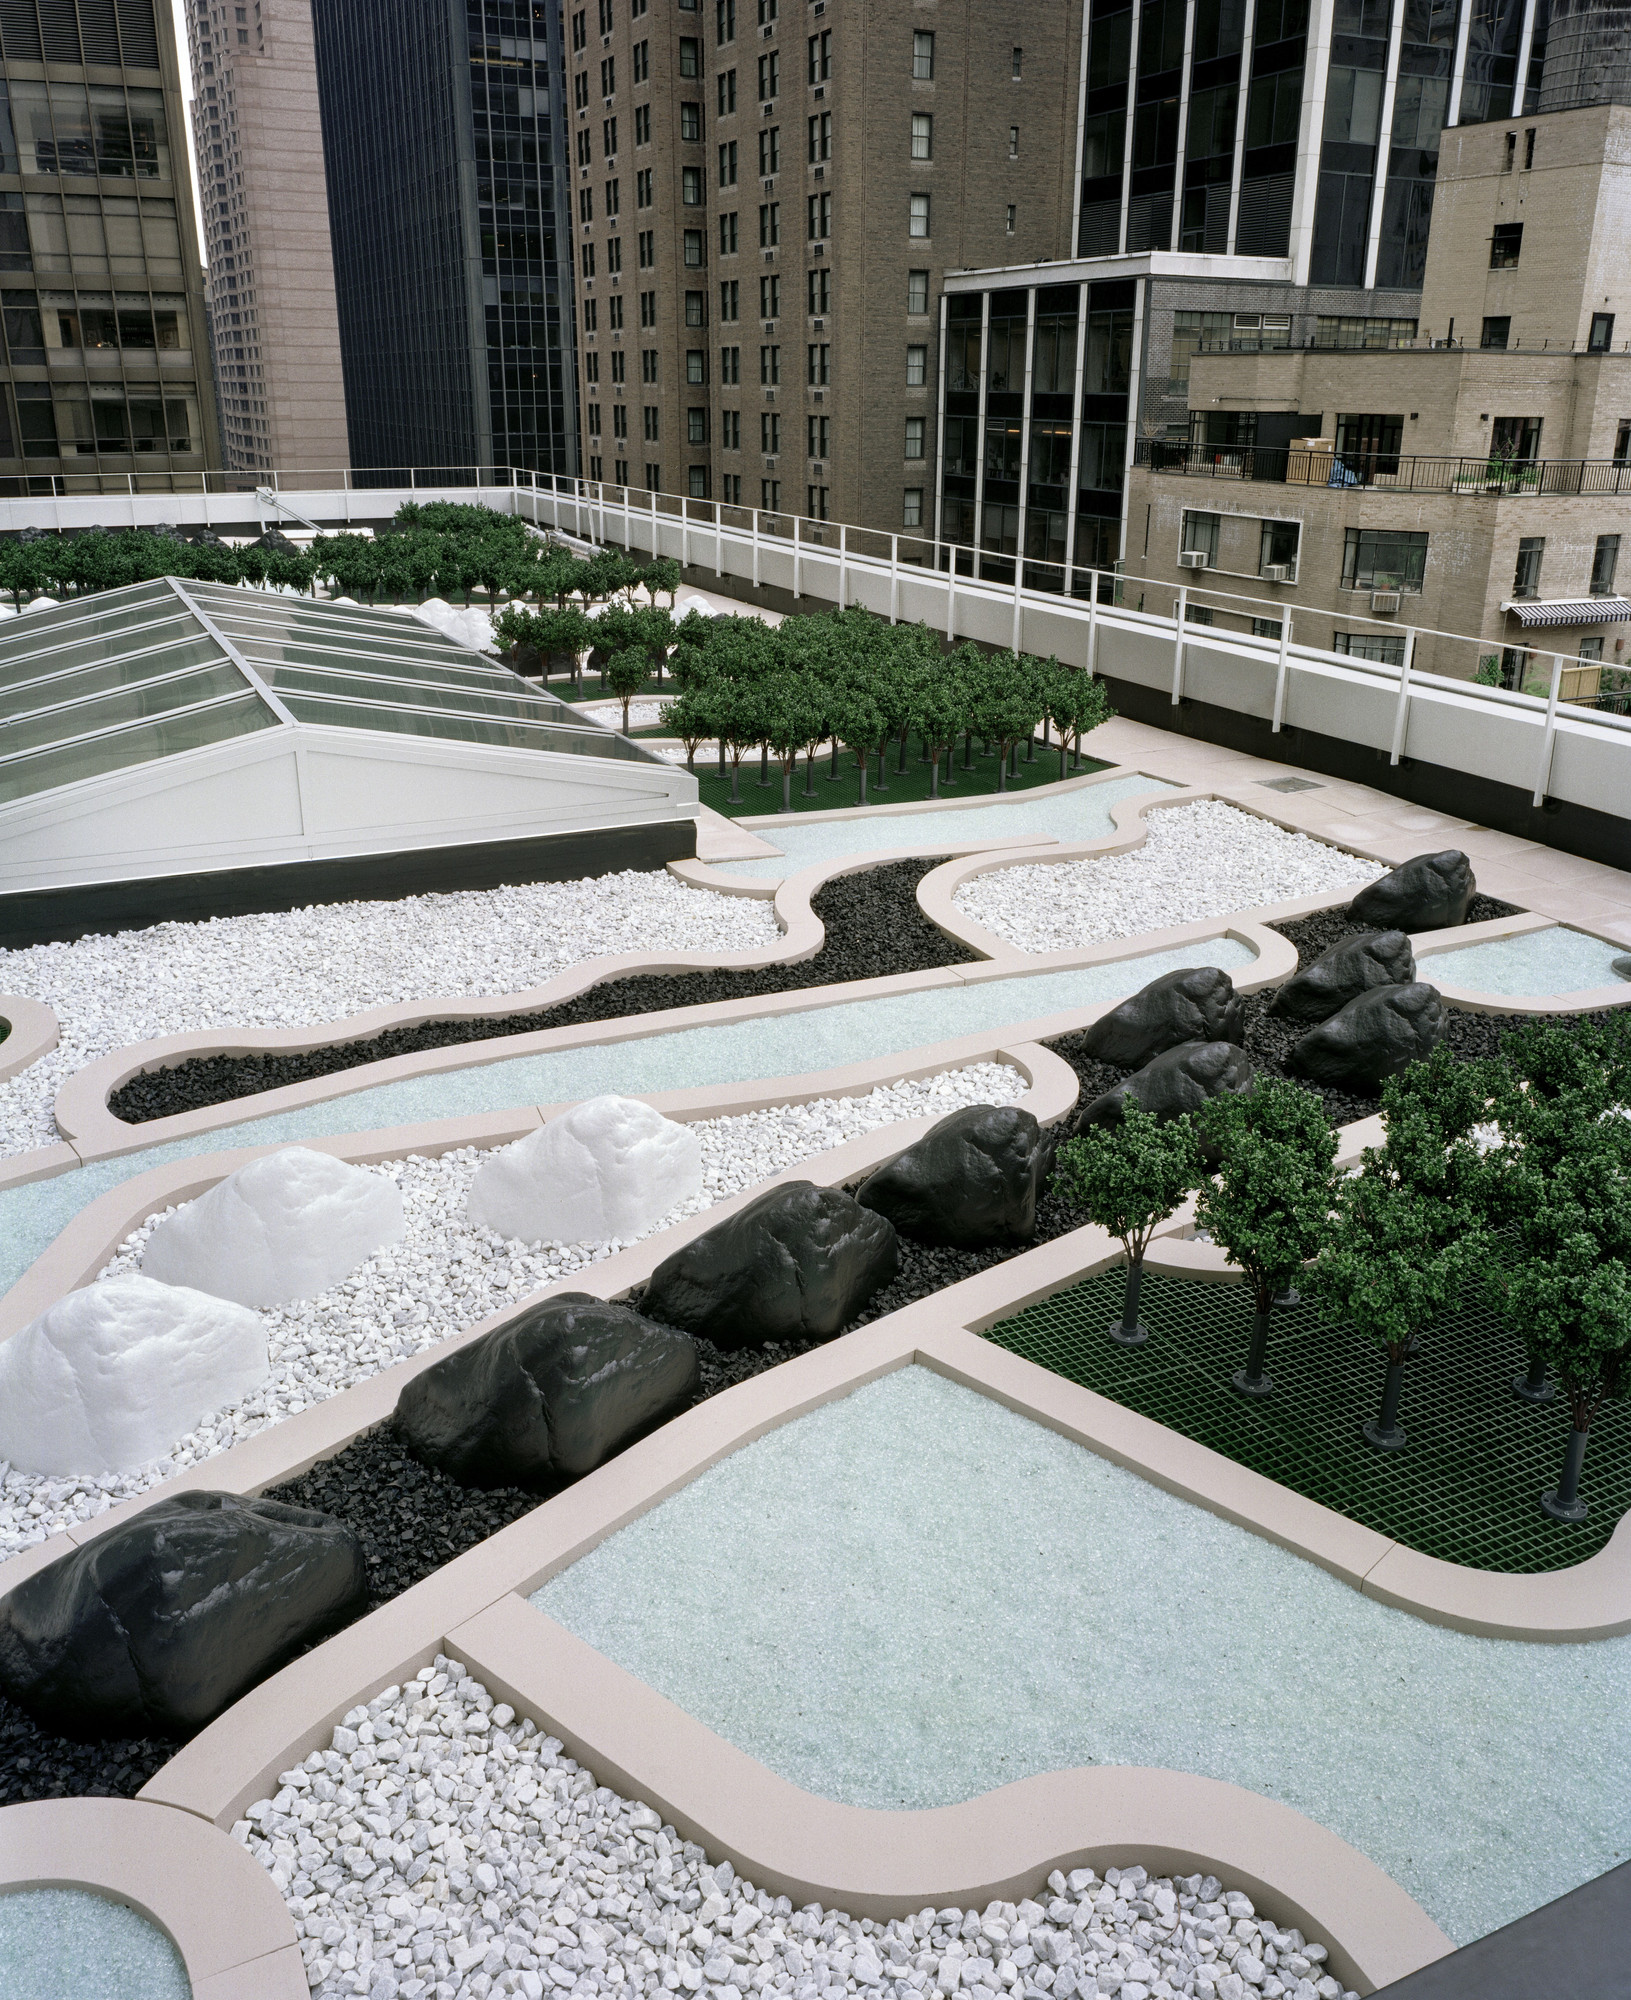 The Museum of Modern Art Roof Garden (2003-2005), represented in the exhibition, Constructing the Contemporary Landscape." | MoMA